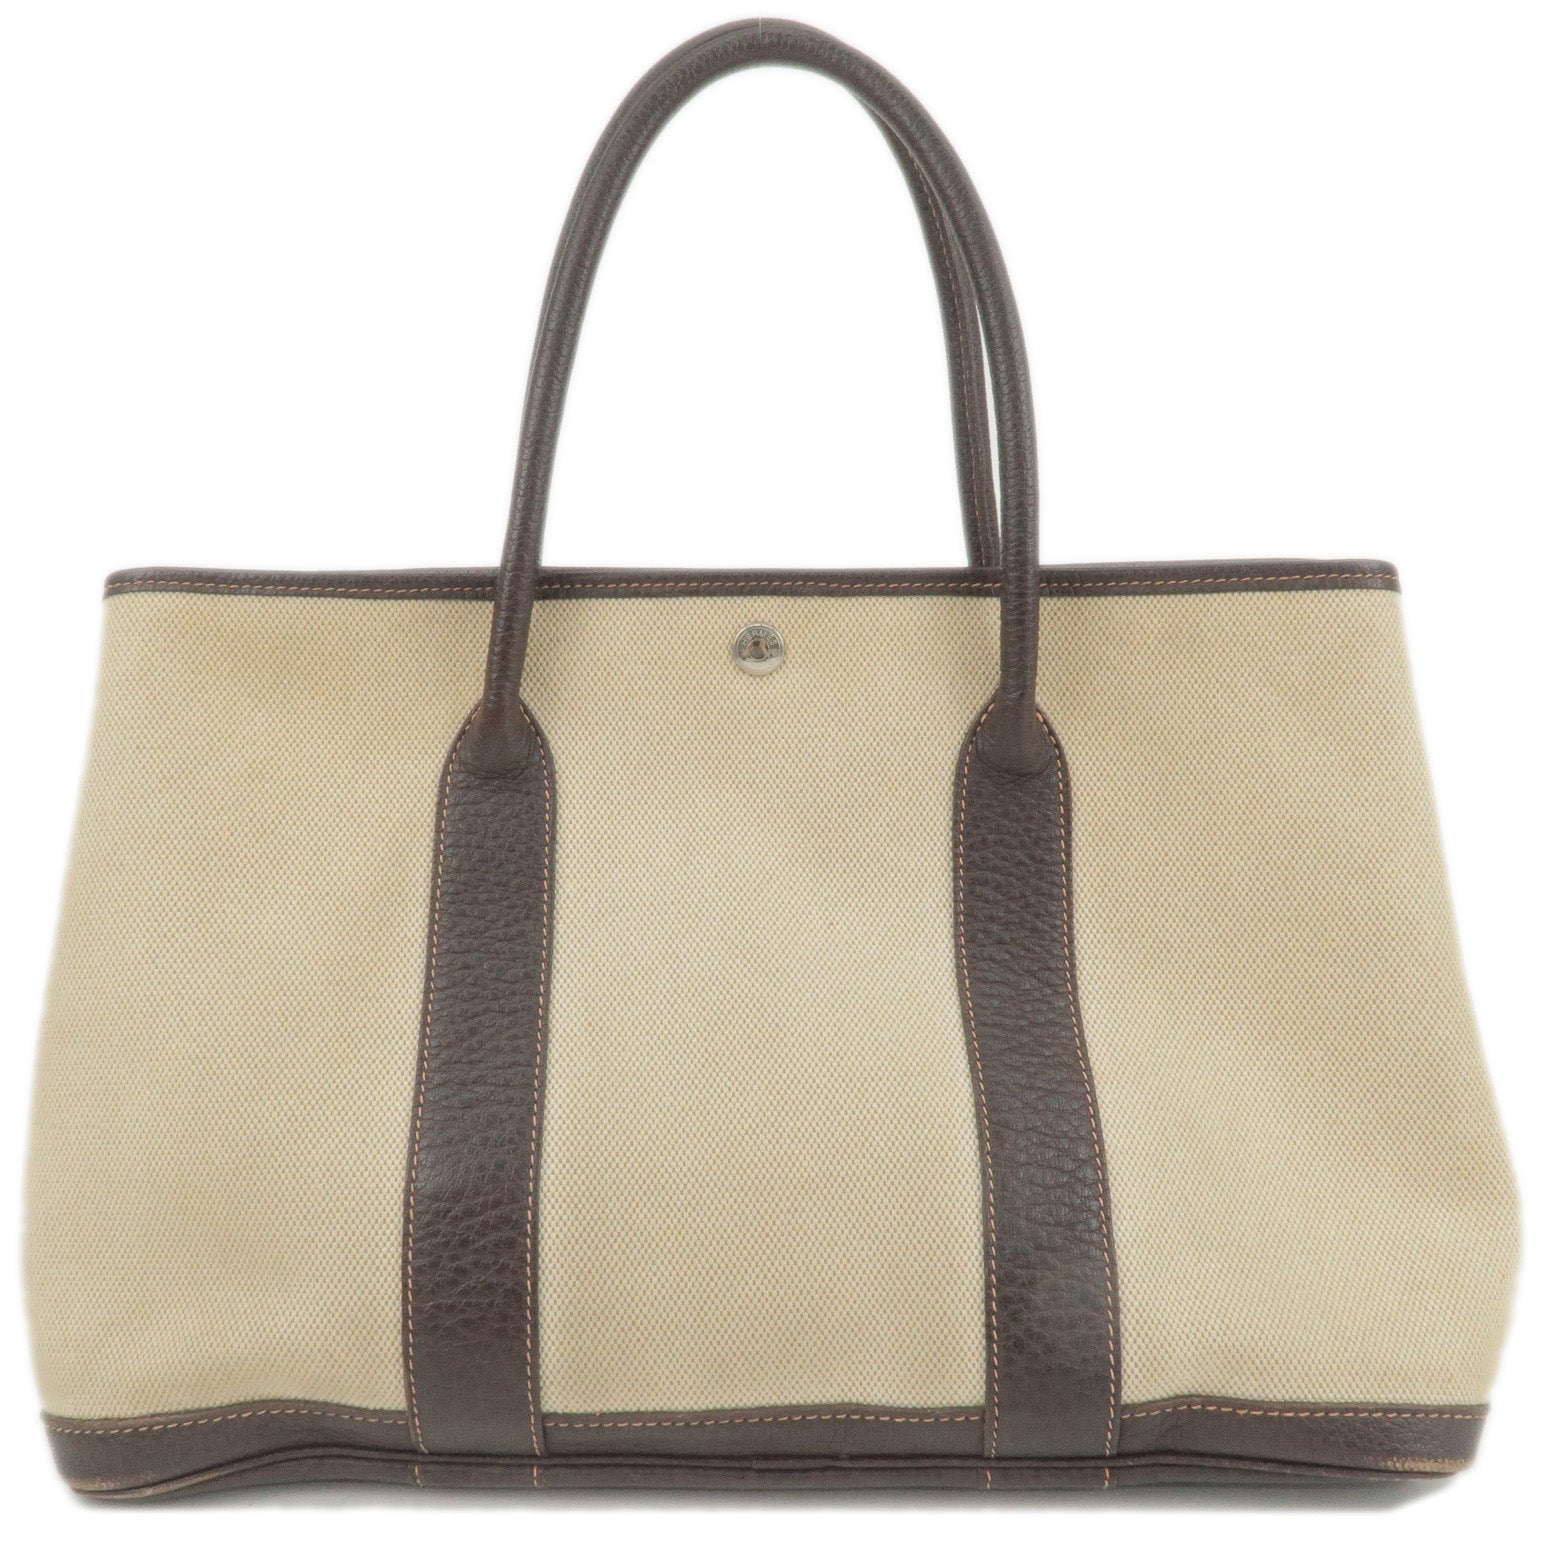 Hermes Garden Party PM Camel Brown Leather Beige Canvas Hand Bag